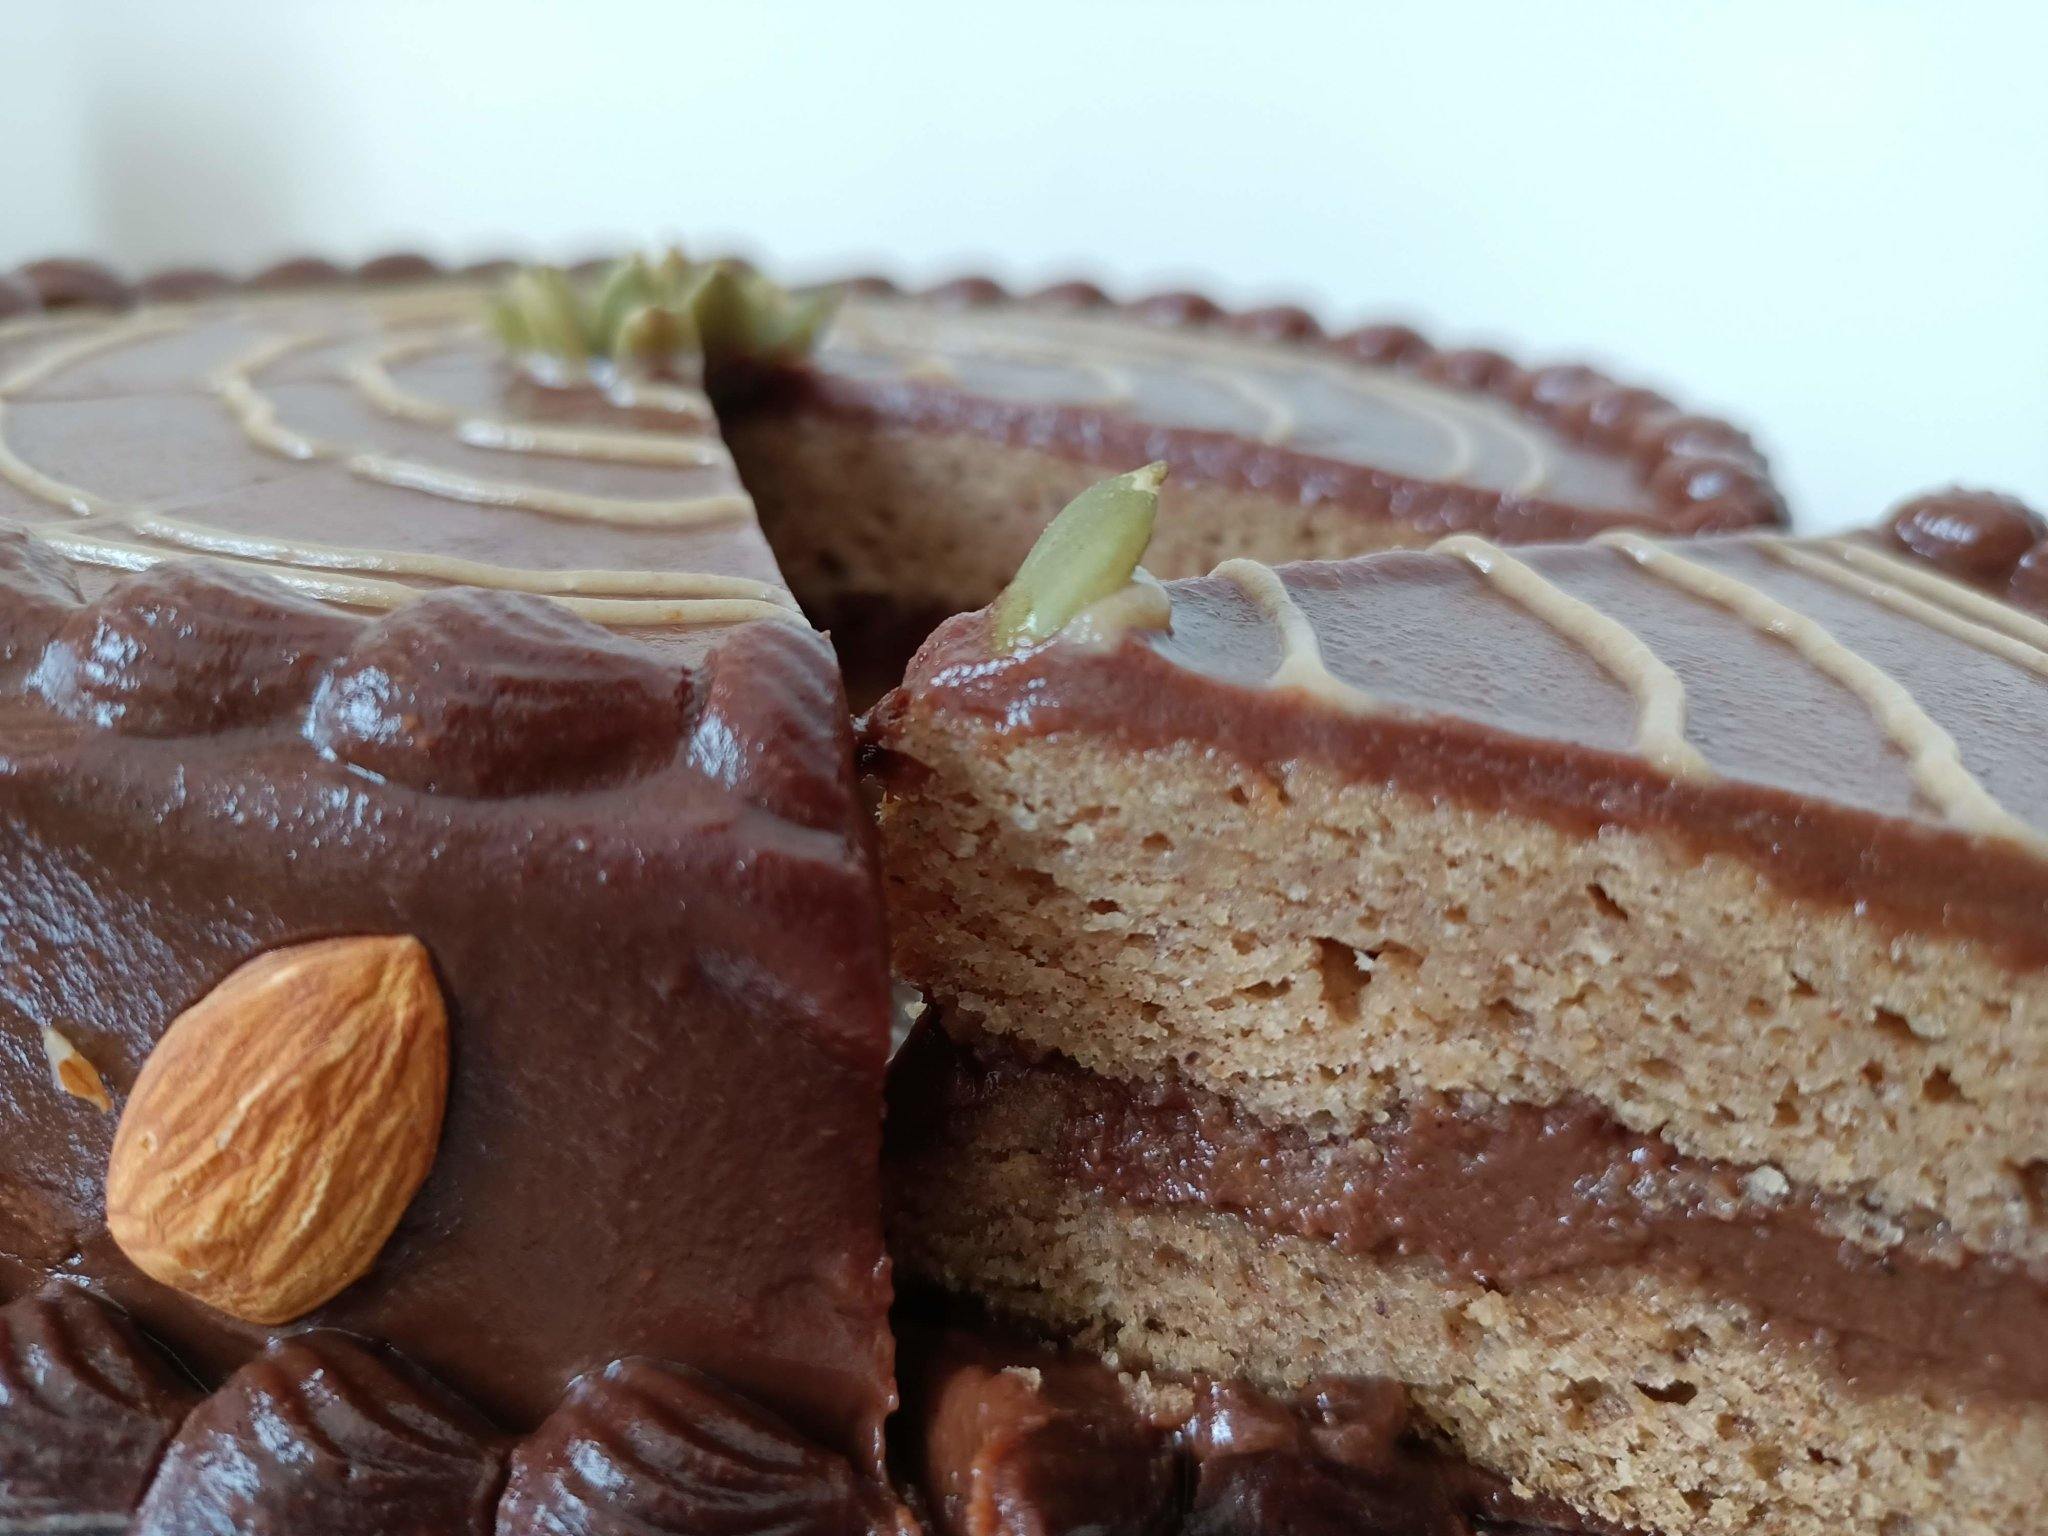 Chocolate Cake With Almond Butter Frosting (600g) - Sampoorna Ahara - Healthy Food, Food Delivery, Food Order Online, Healthy Snacks, Healthy Breakfast, Sourdough Breads, Sugar-free Desserts